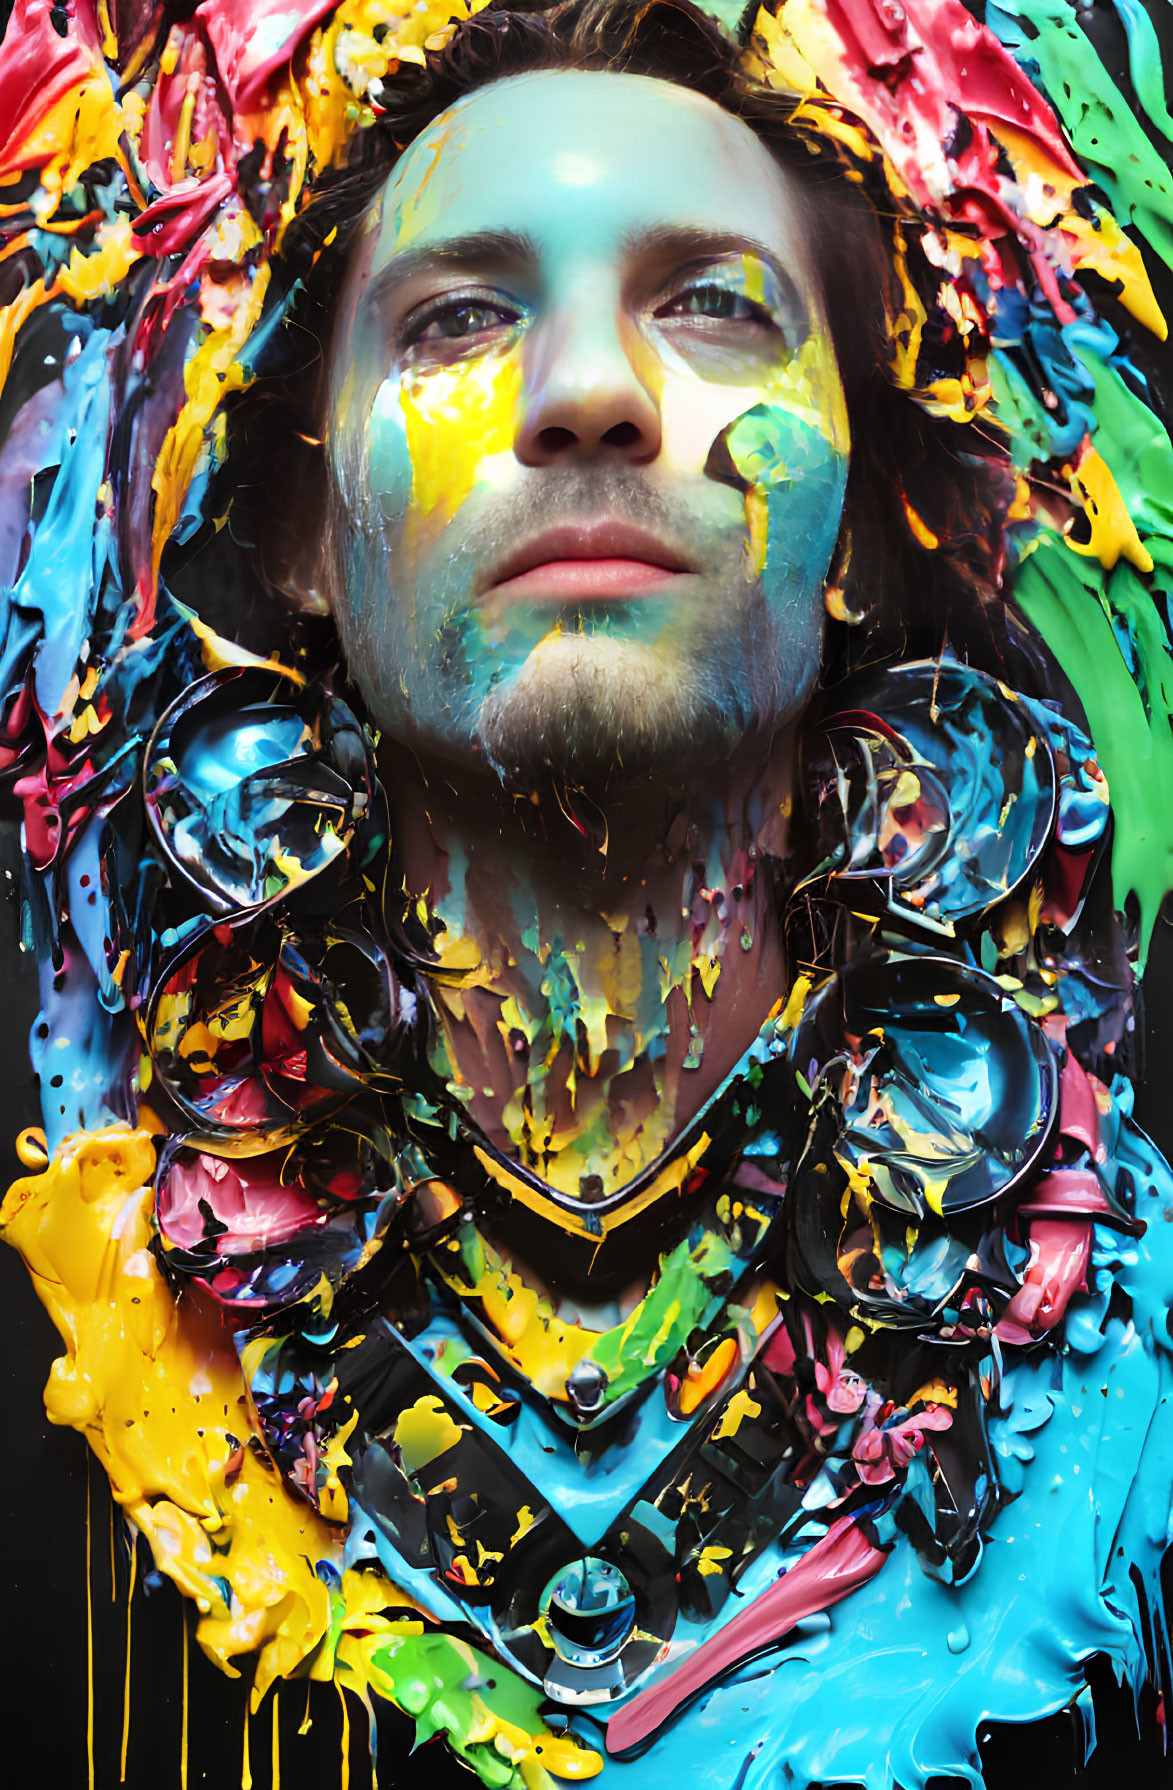 Contemplative person covered in vibrant paint splashes